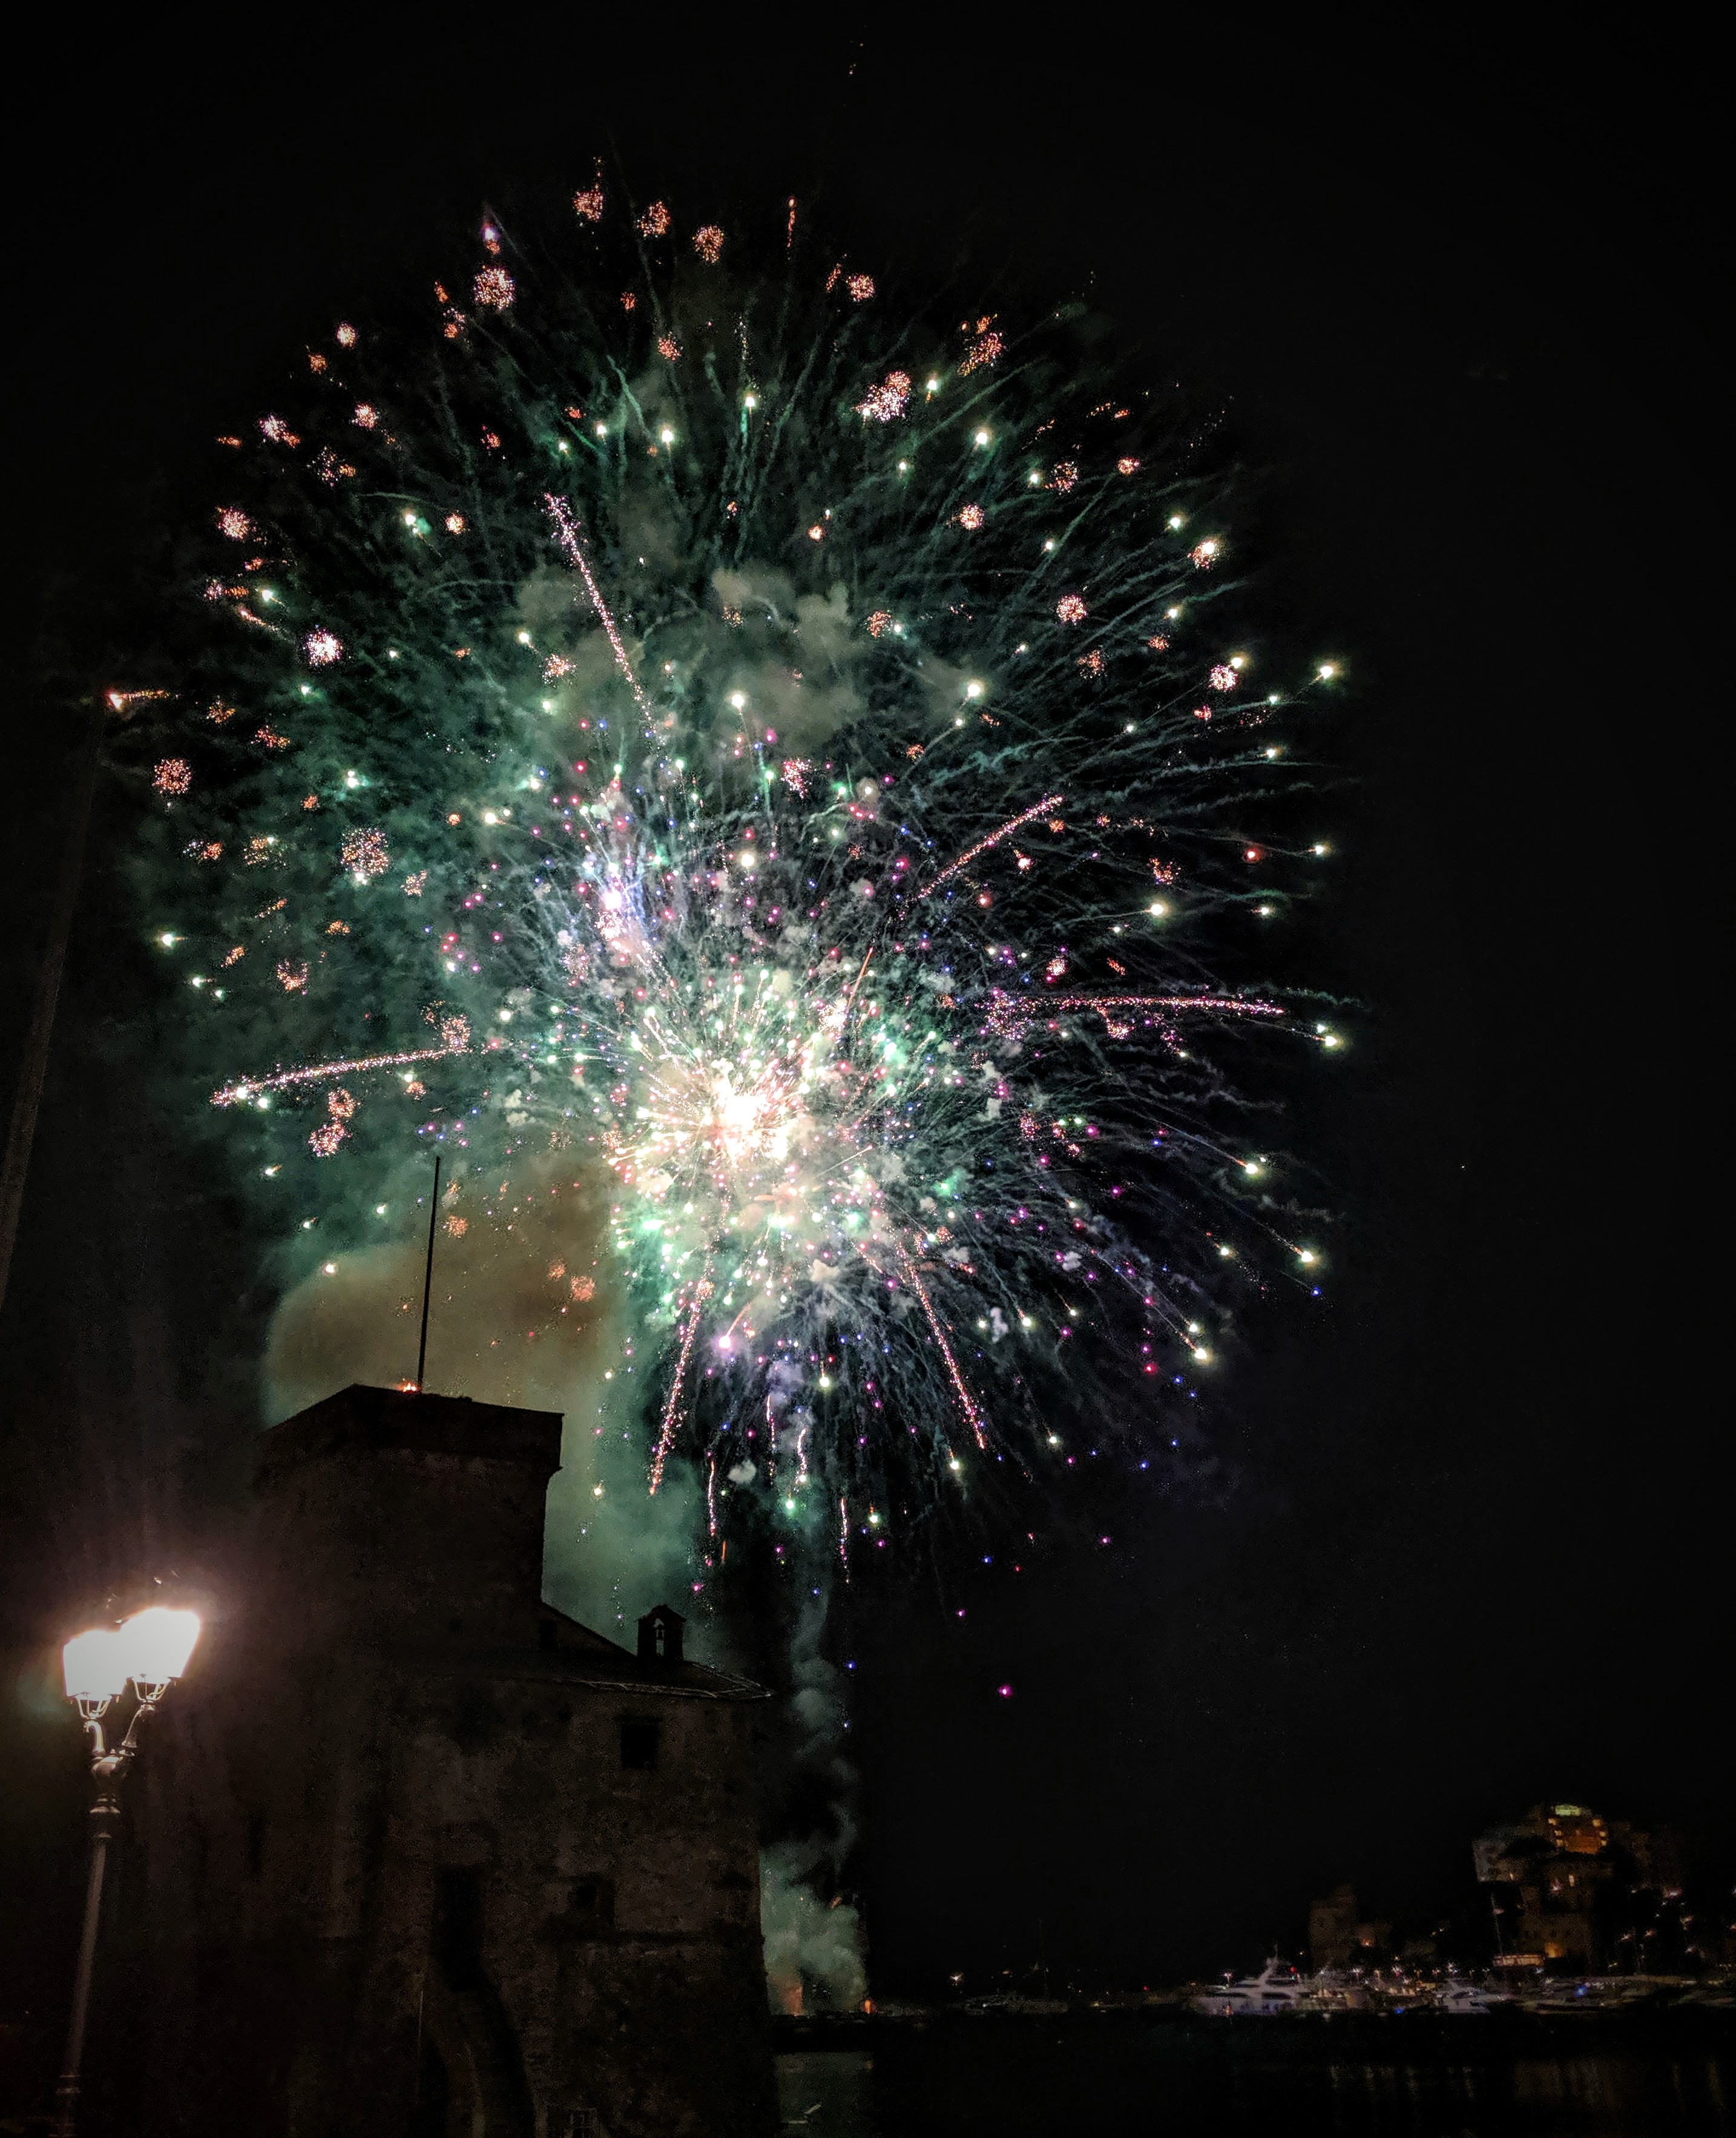 Fireworks with the Rapallo castle in the foreground. 